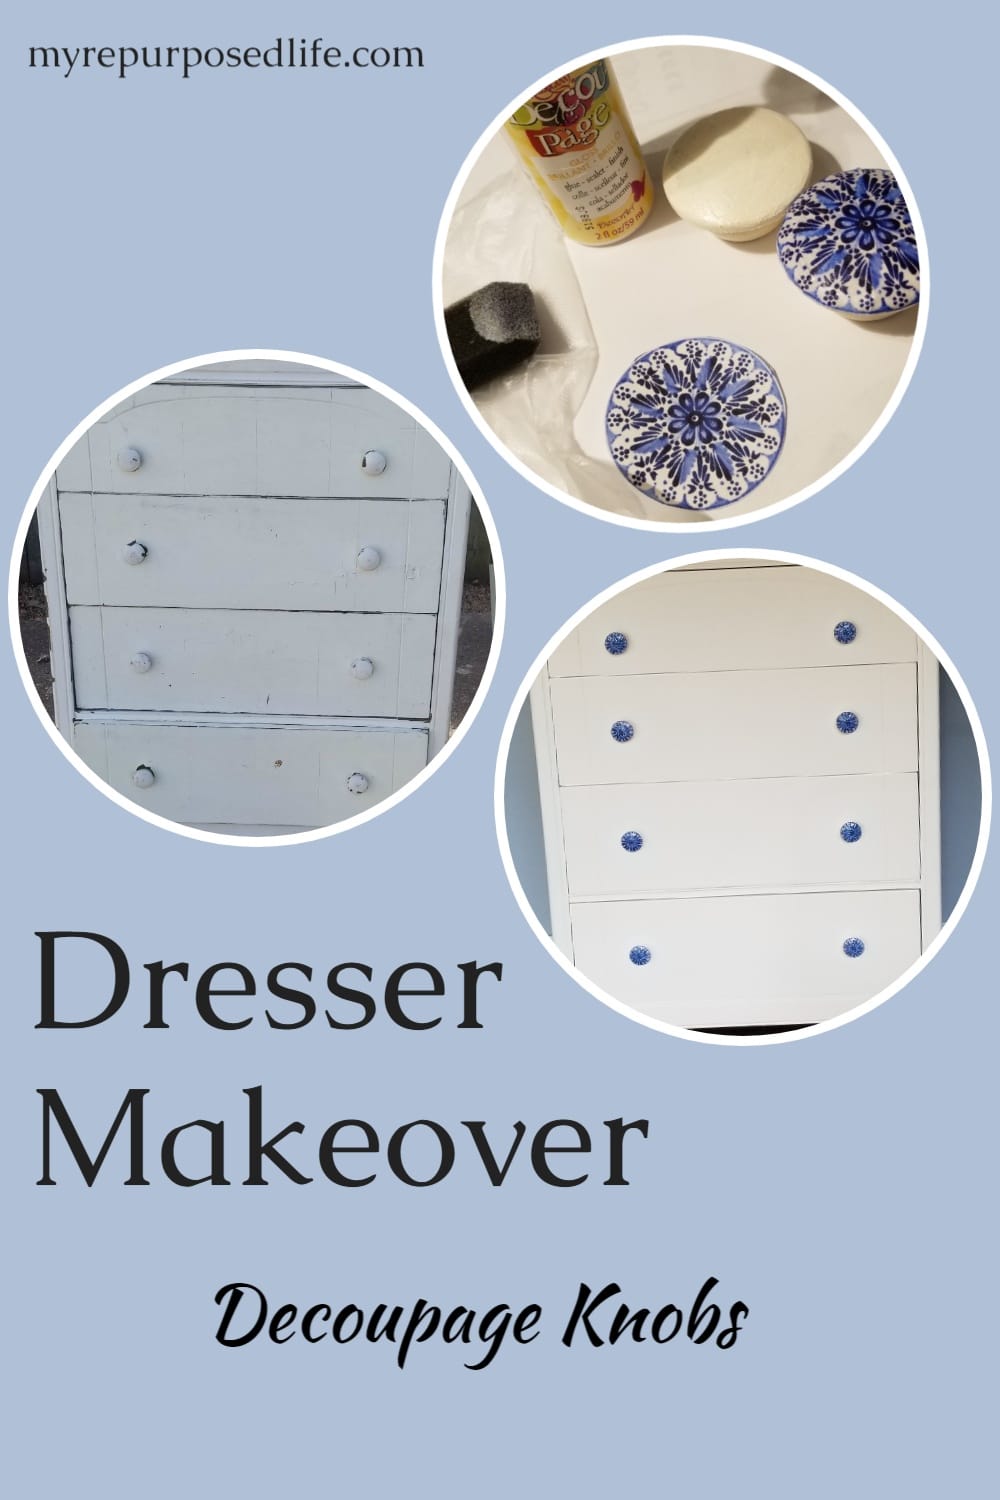 How to give an old dresser a new chippy look. This dresser makeover with decoupage wooden knobs will have you smiling when you finish it! #MyRepurposedLife #furniture #makeover #decoupage #knobs via @repurposedlife